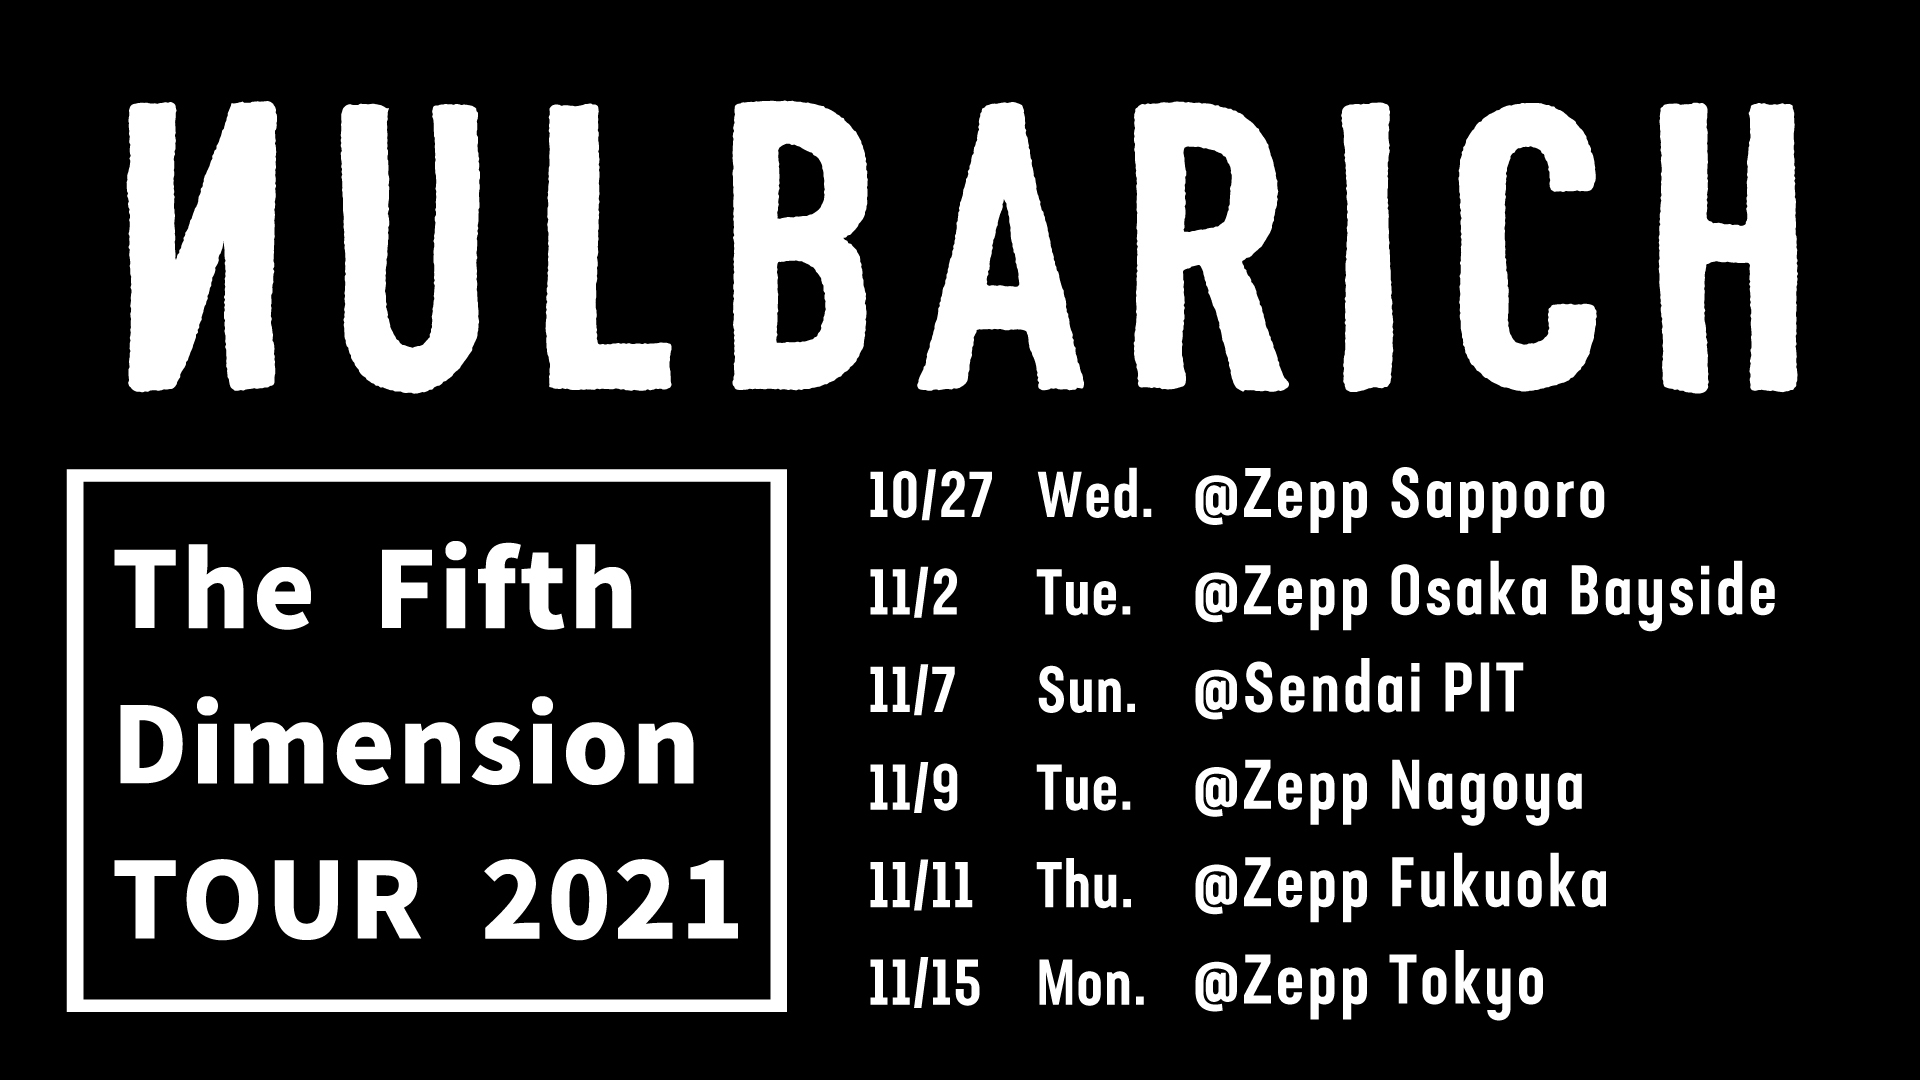 『Nulbarich The Fifth Dimension TOUR 2021』スケジュール